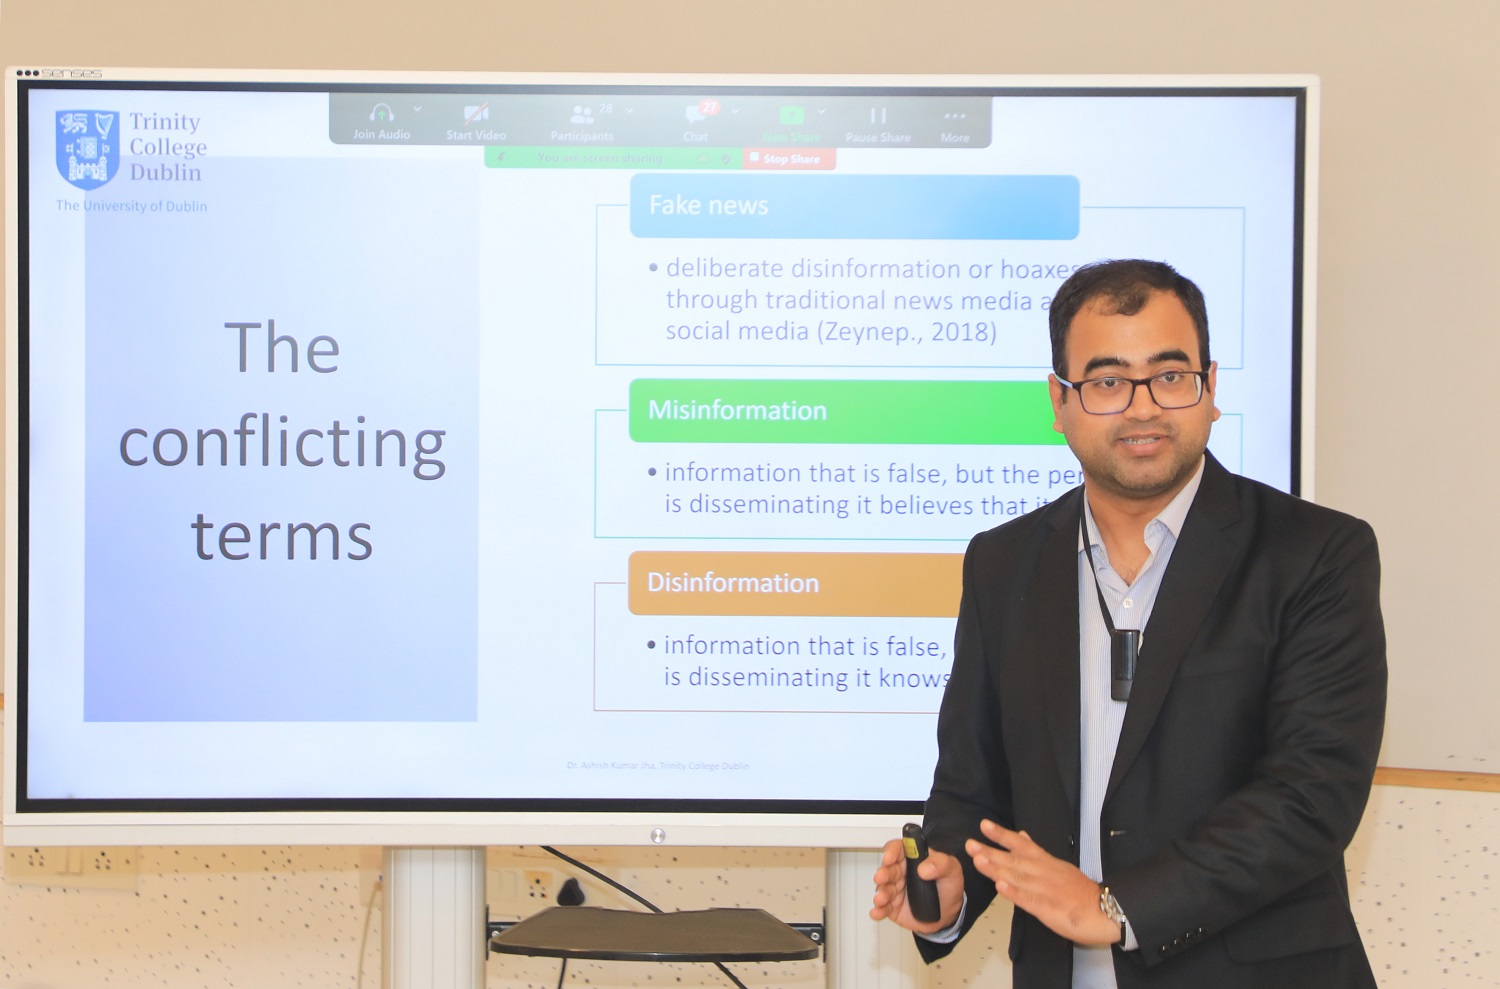 Prof. Ashish Kumar Jha from Trinity College Dublin spoke at the Information Systems (IS) research seminar on ‘Responsible News Dissemination and Echo Chambers: Impact of Personality Type and Ideology on Echo-Chamber Driven Misinformation’ on 14th December 2023.